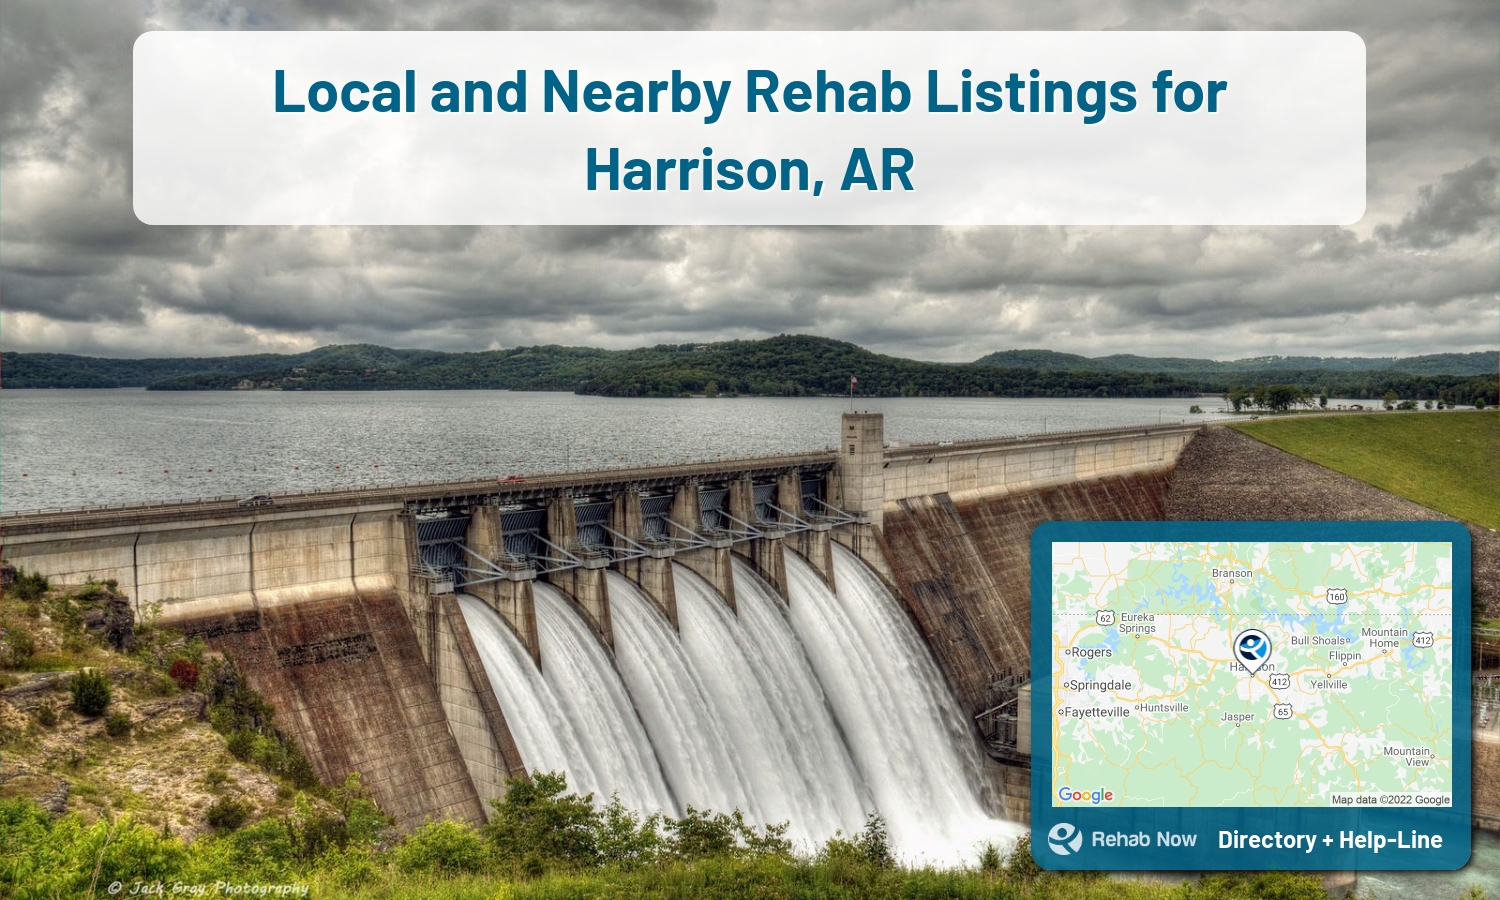 Harrison, AR Treatment Centers. Find drug rehab in Harrison, Arkansas, or detox and treatment programs. Get the right help now!